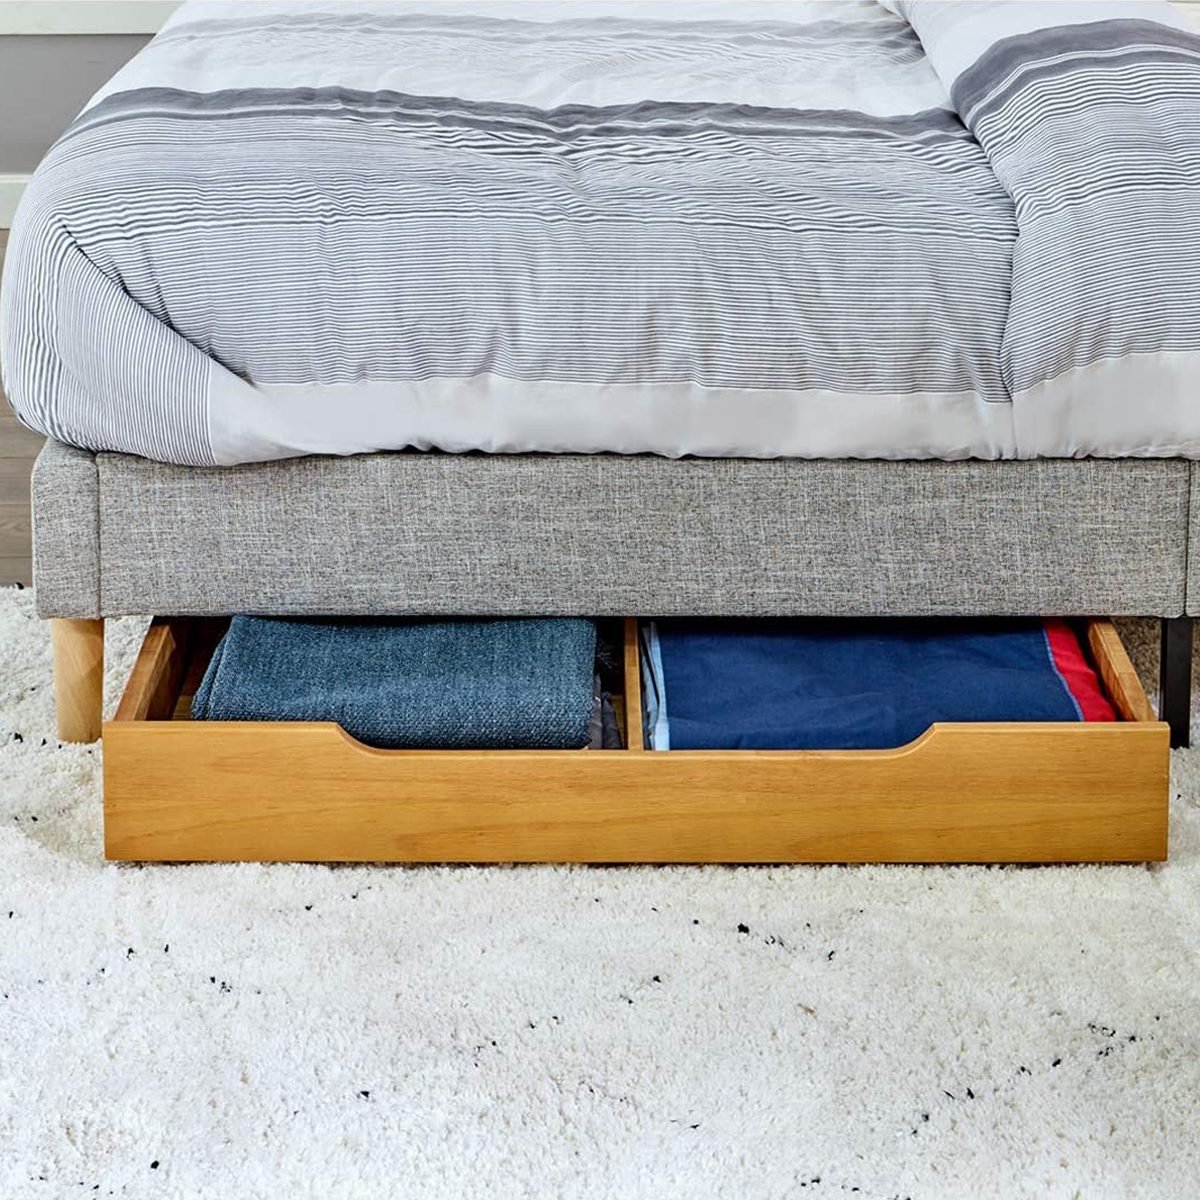 The 7 best under-bed storage solutions to maximize your space